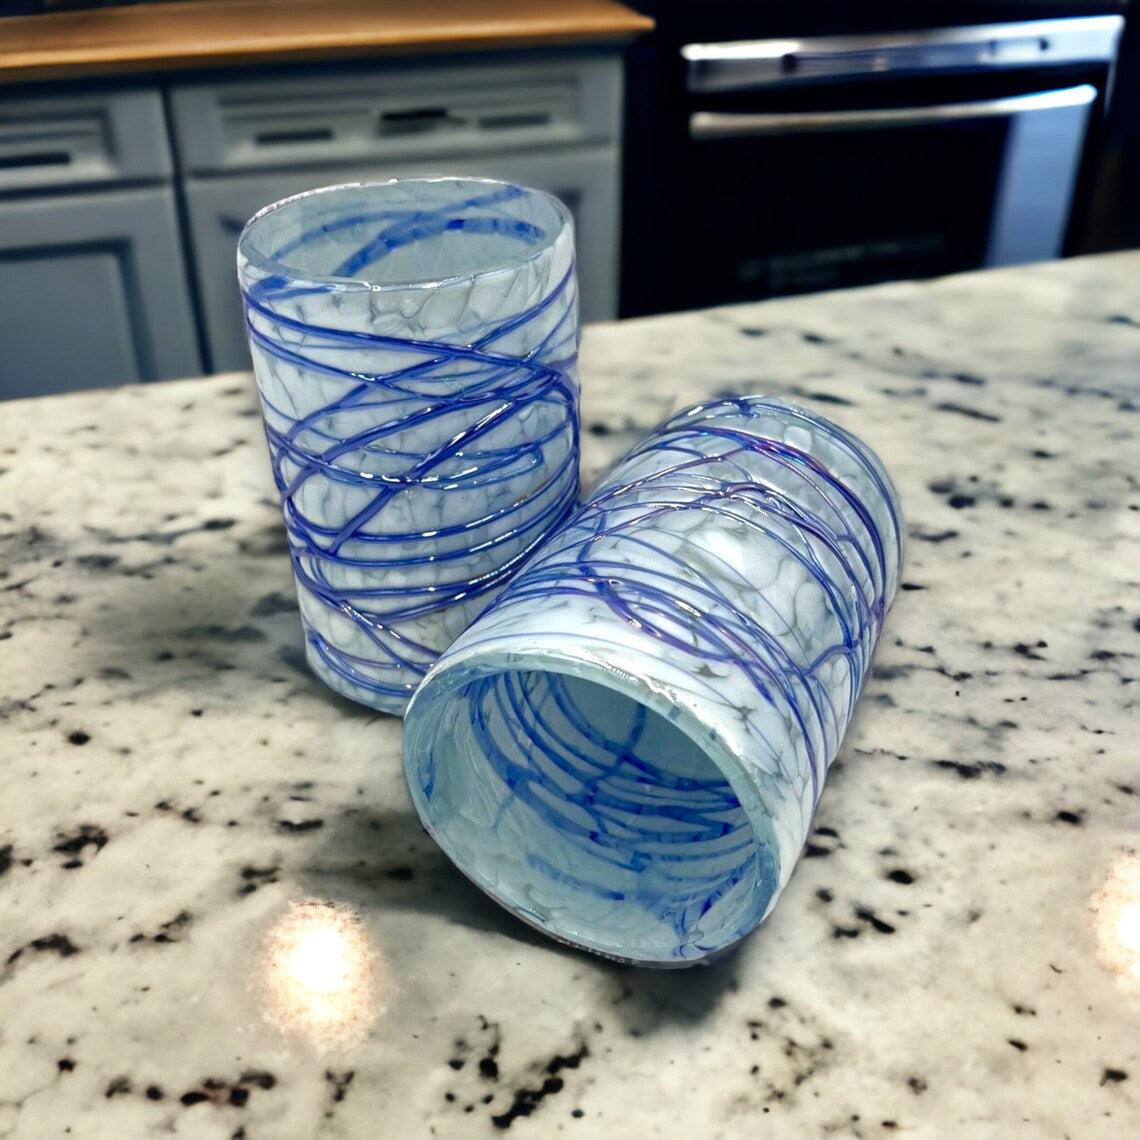 Hand Blown Blue Mexican Drinking Glasses and Pitcher - Set of 6